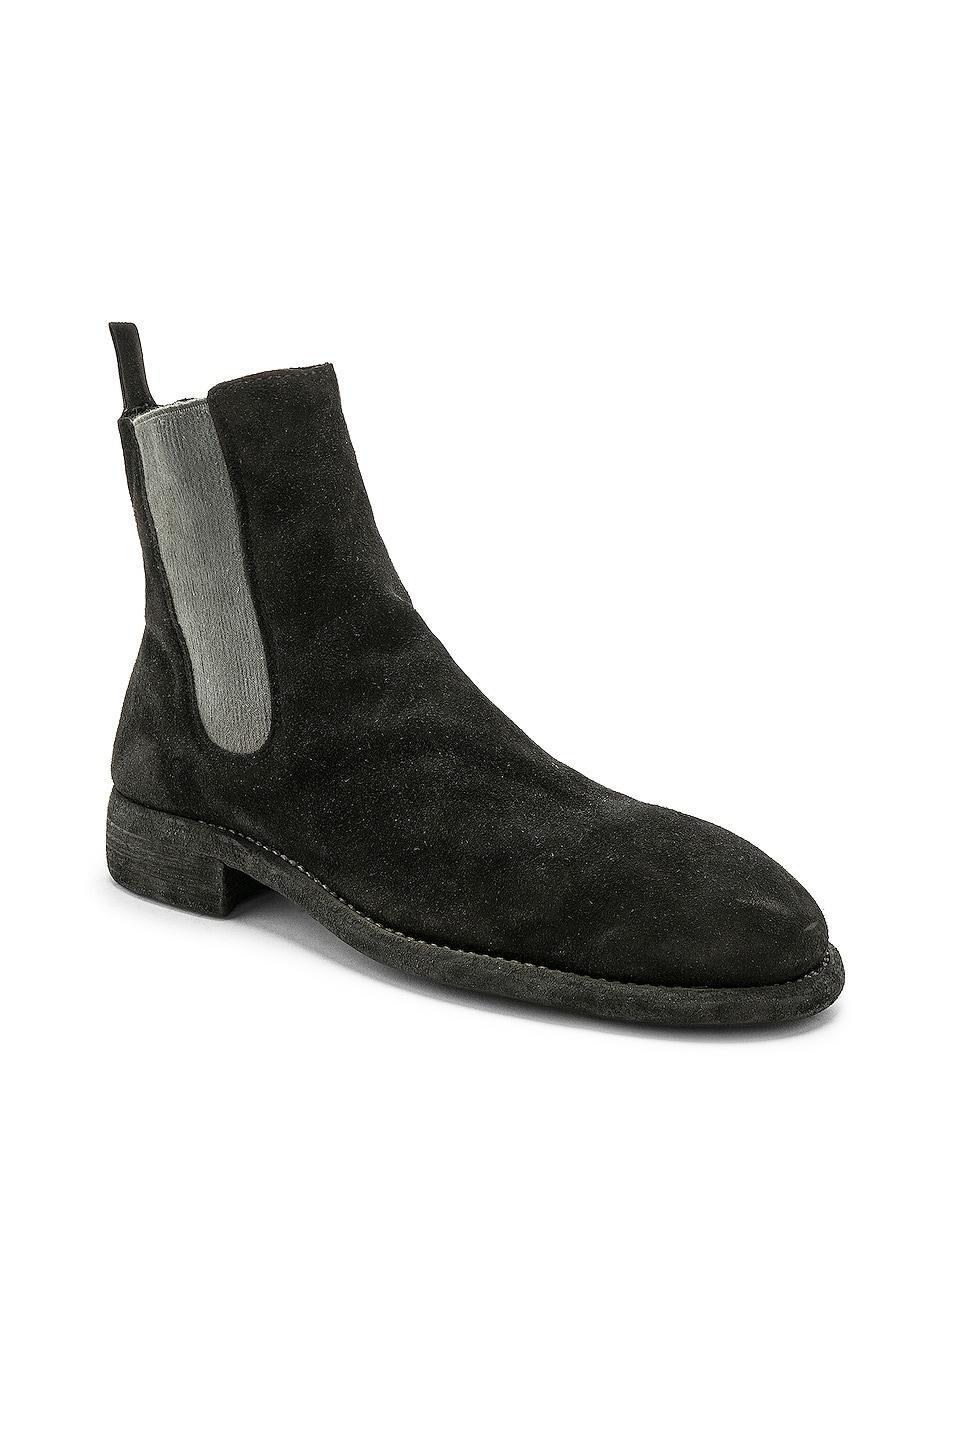 Guidi Suede Chelsea Boots in Black Product Image